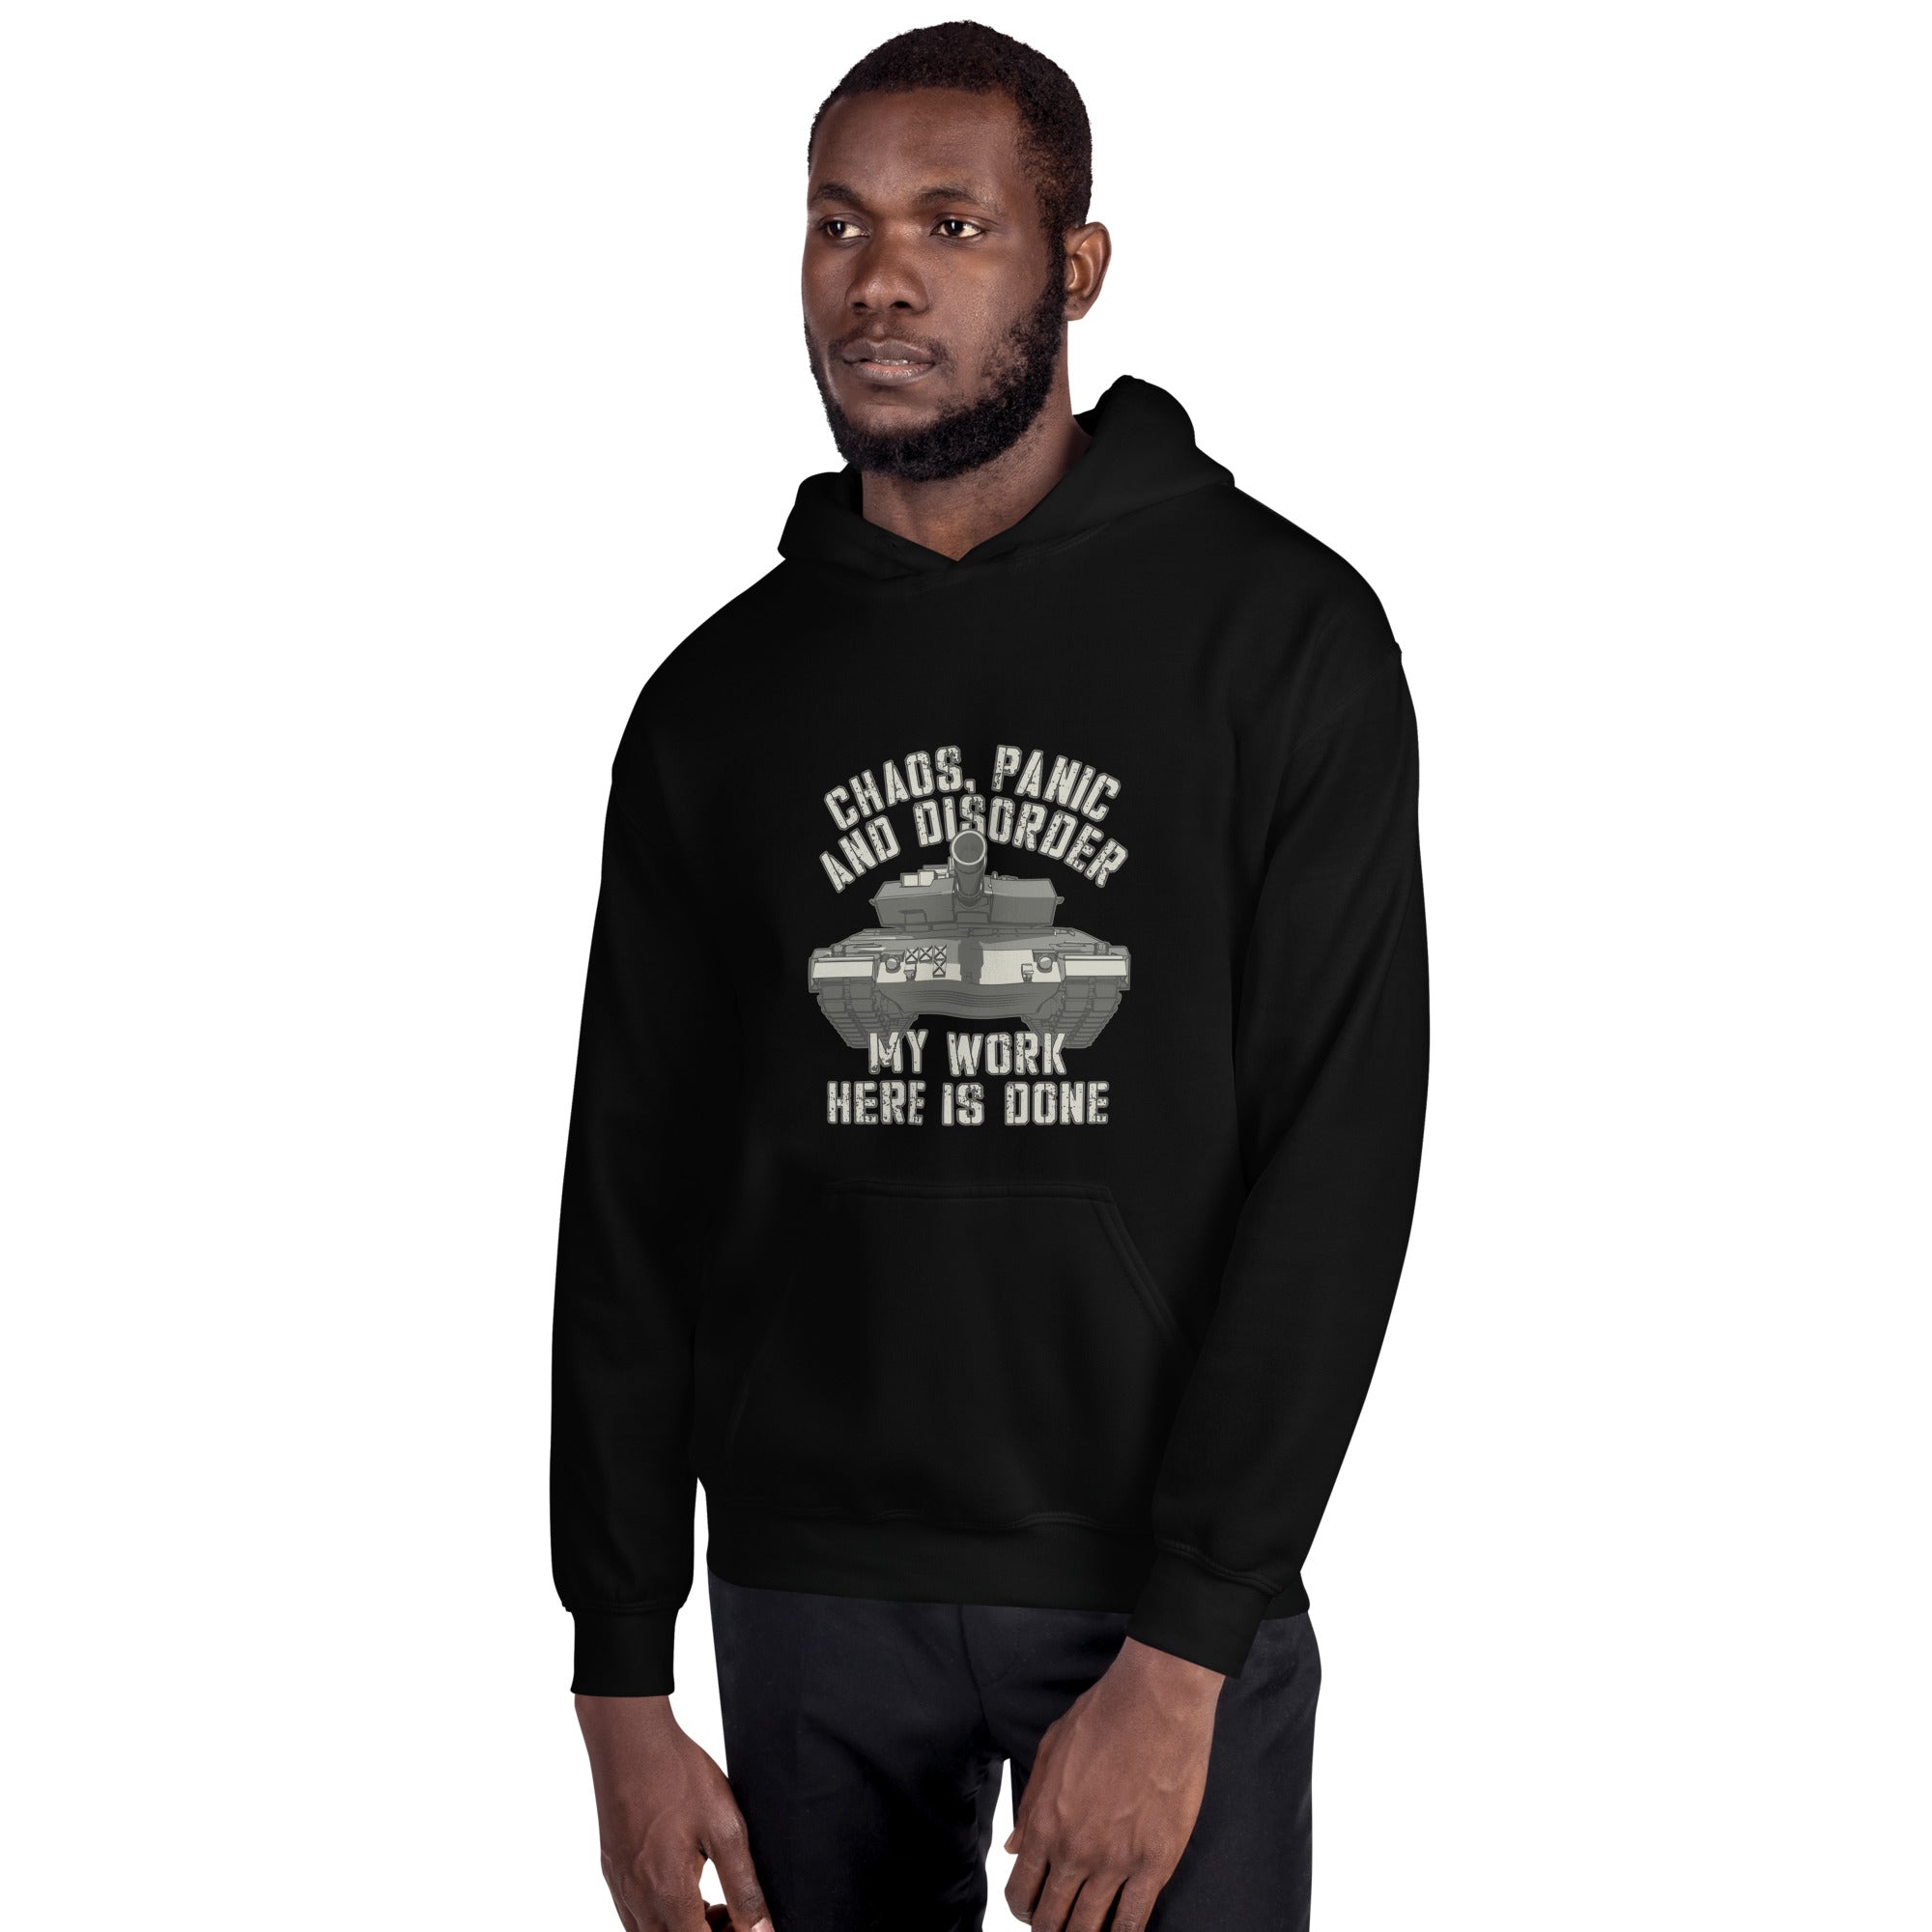 Chaos Panic And Disorder - Unisex Hoodie